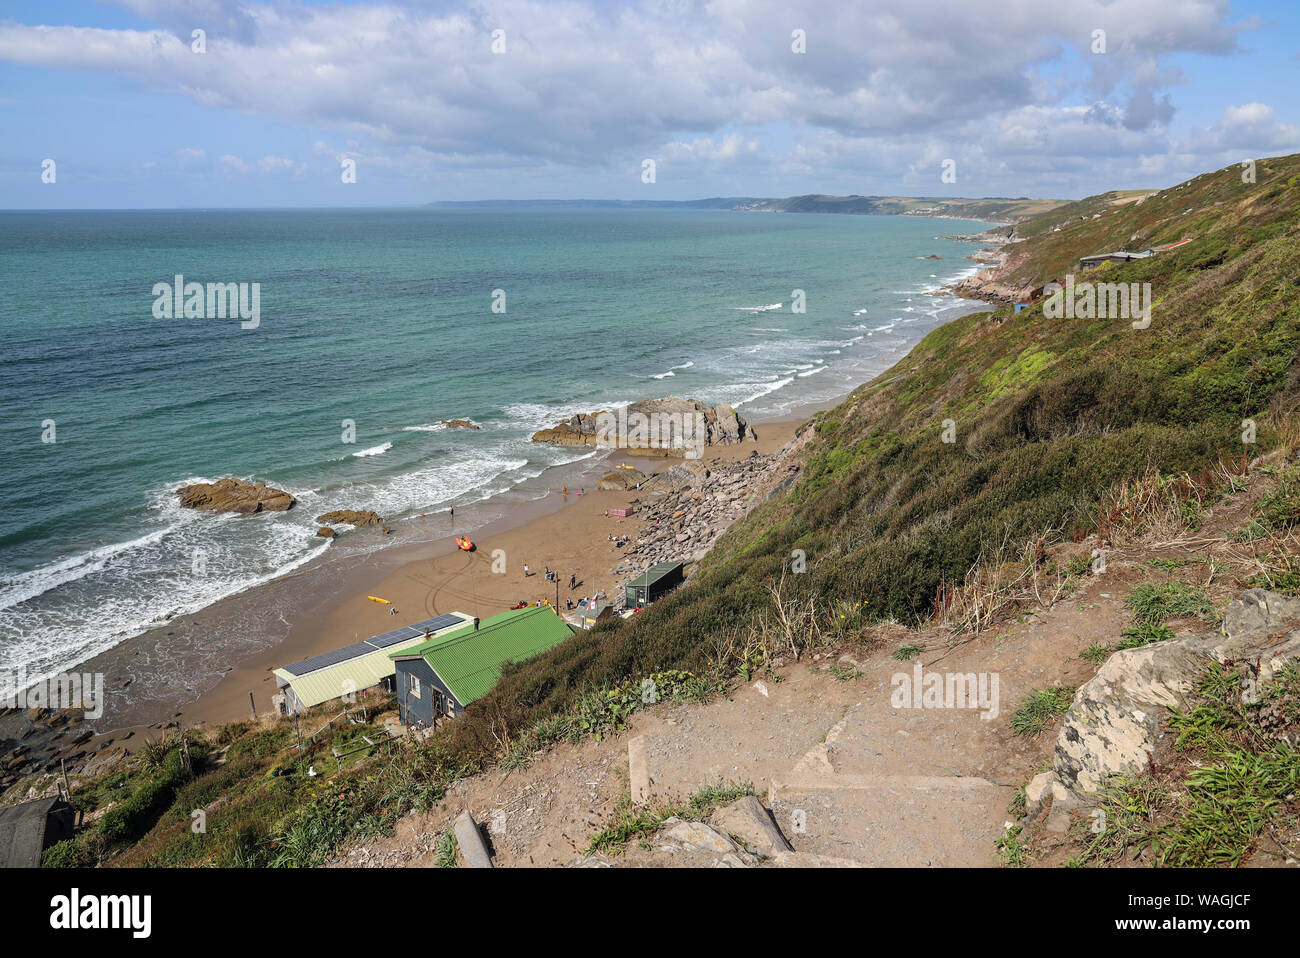 Uneven steps add to the excitement of a visit to Tregonhawke Beach, Whitsand Bay, Rame, Cornwall Stock Photo